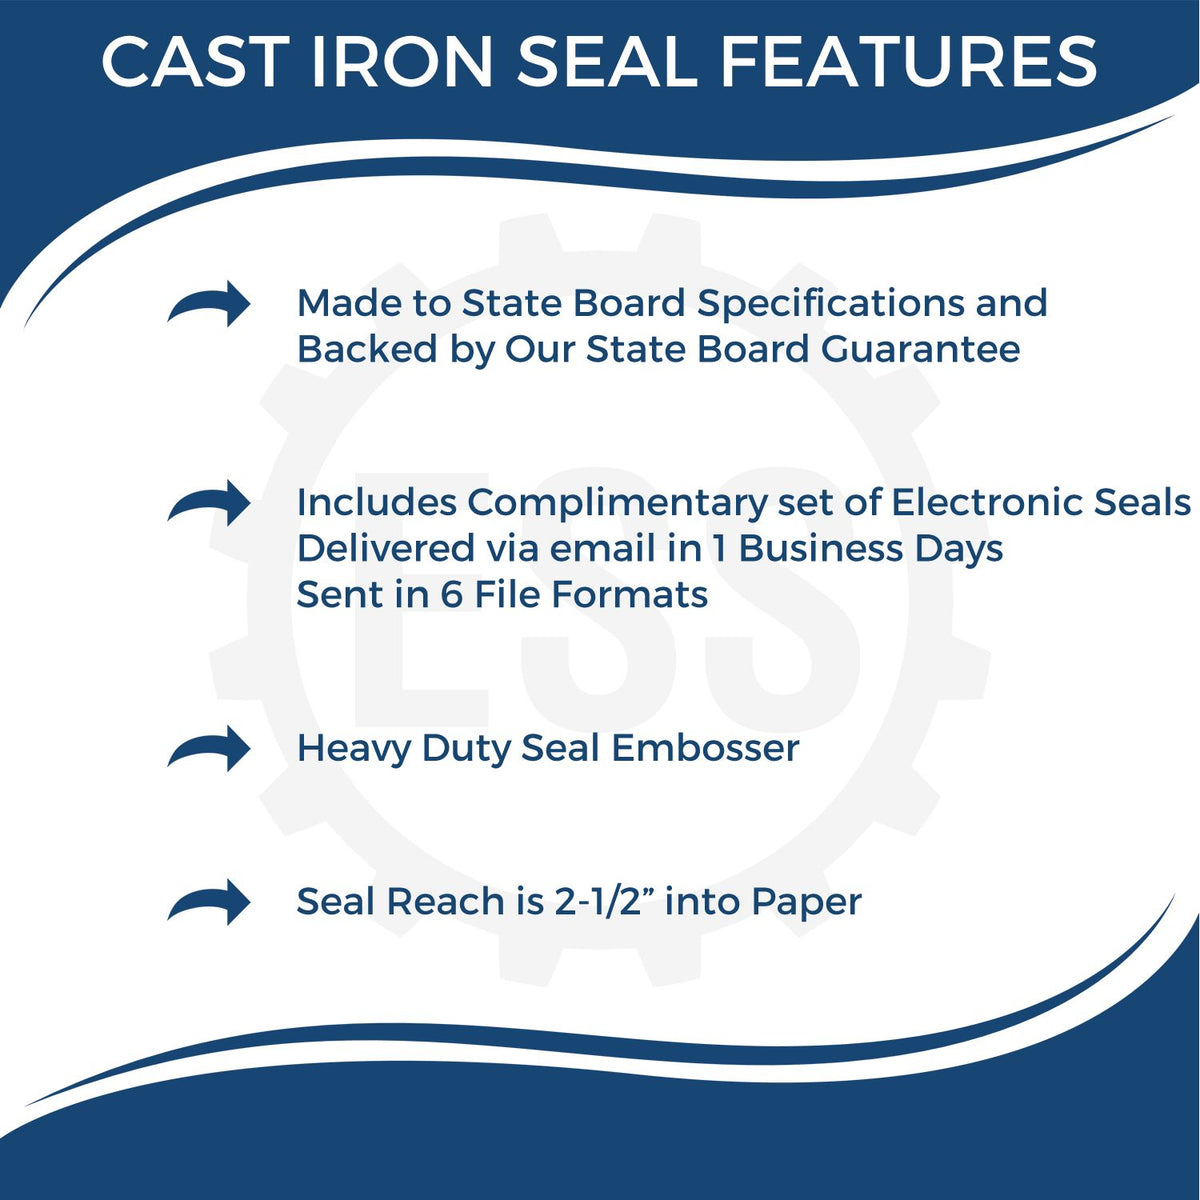 A picture of an infographic highlighting the selling points for the Heavy Duty Cast Iron Ohio Geologist Seal Embosser